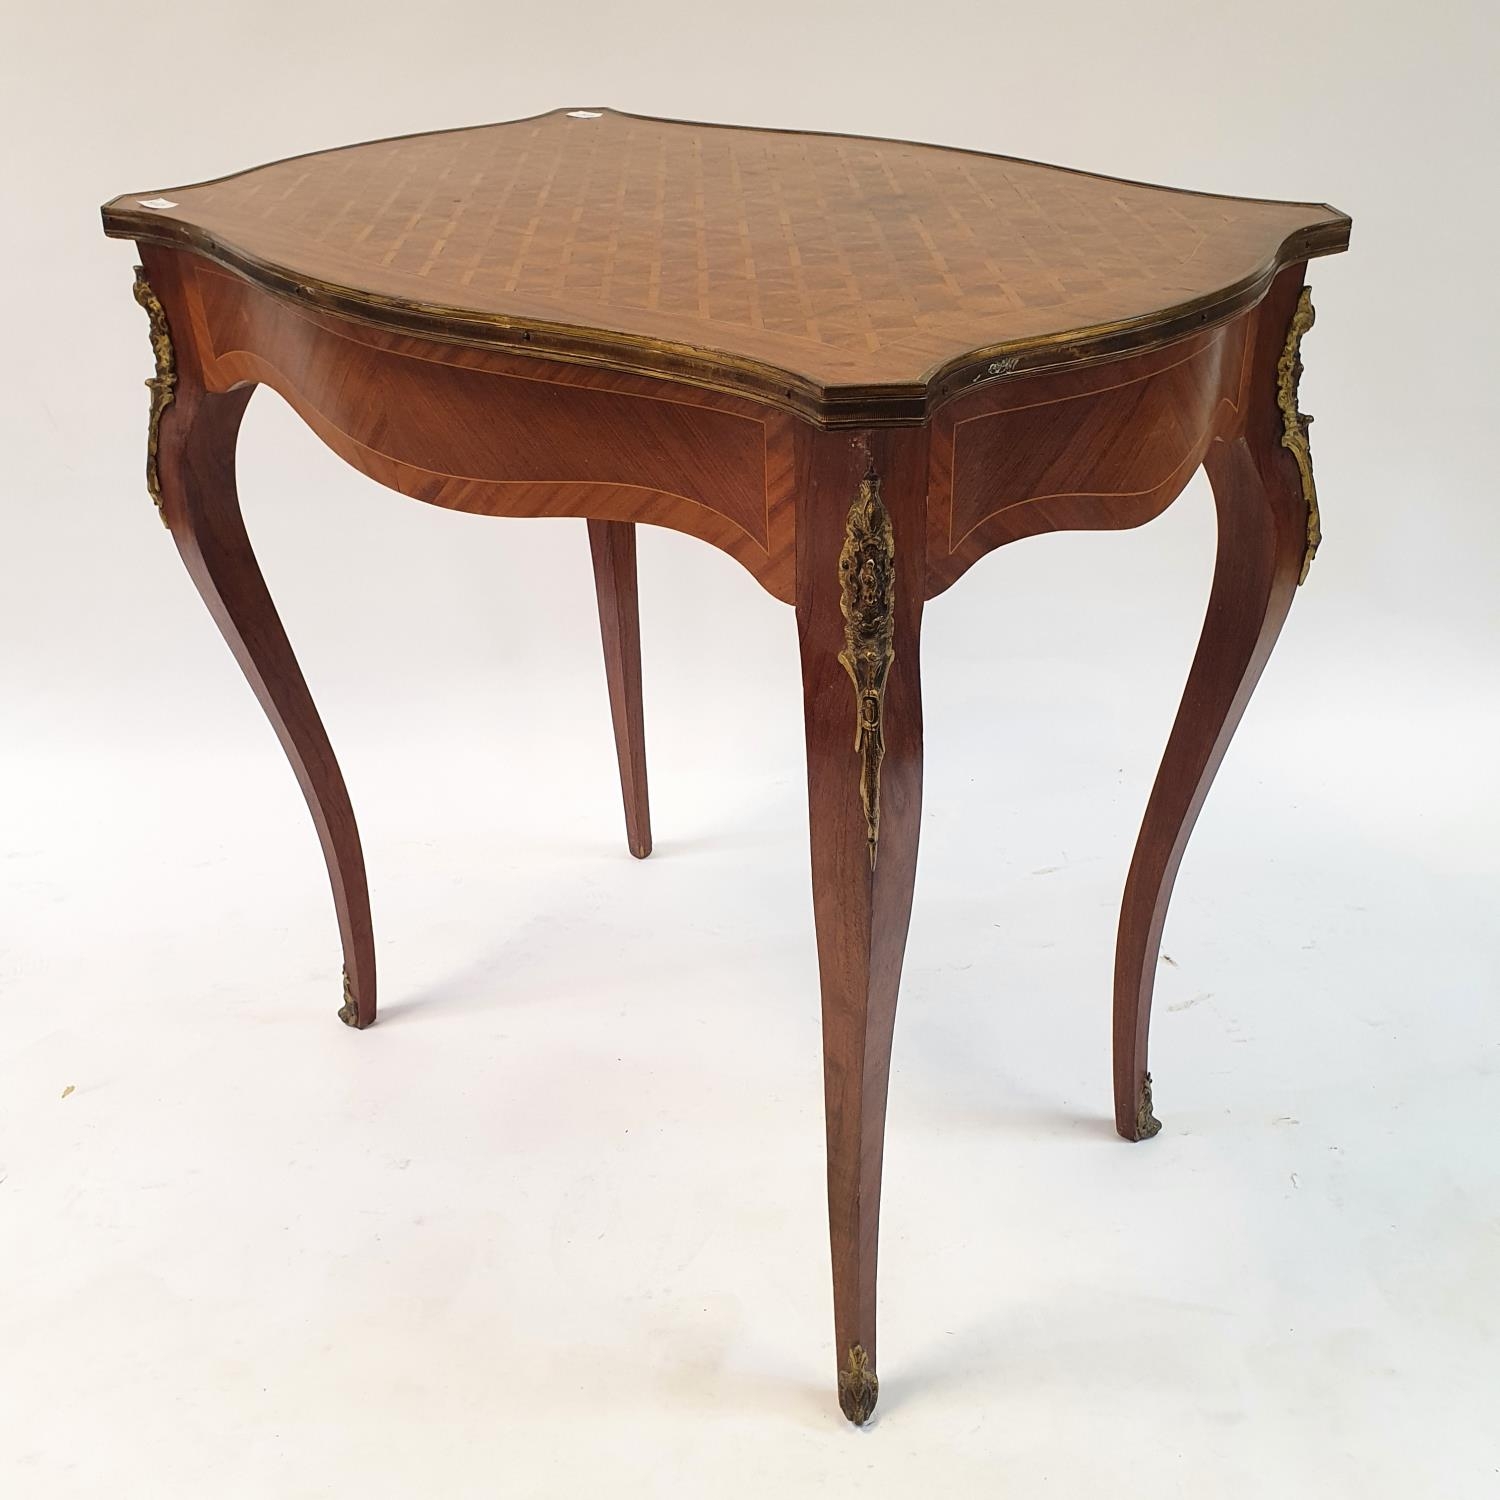 A 20th century French rosewood serpentine side table with parquetry inlay, having a single frieze - Image 4 of 4